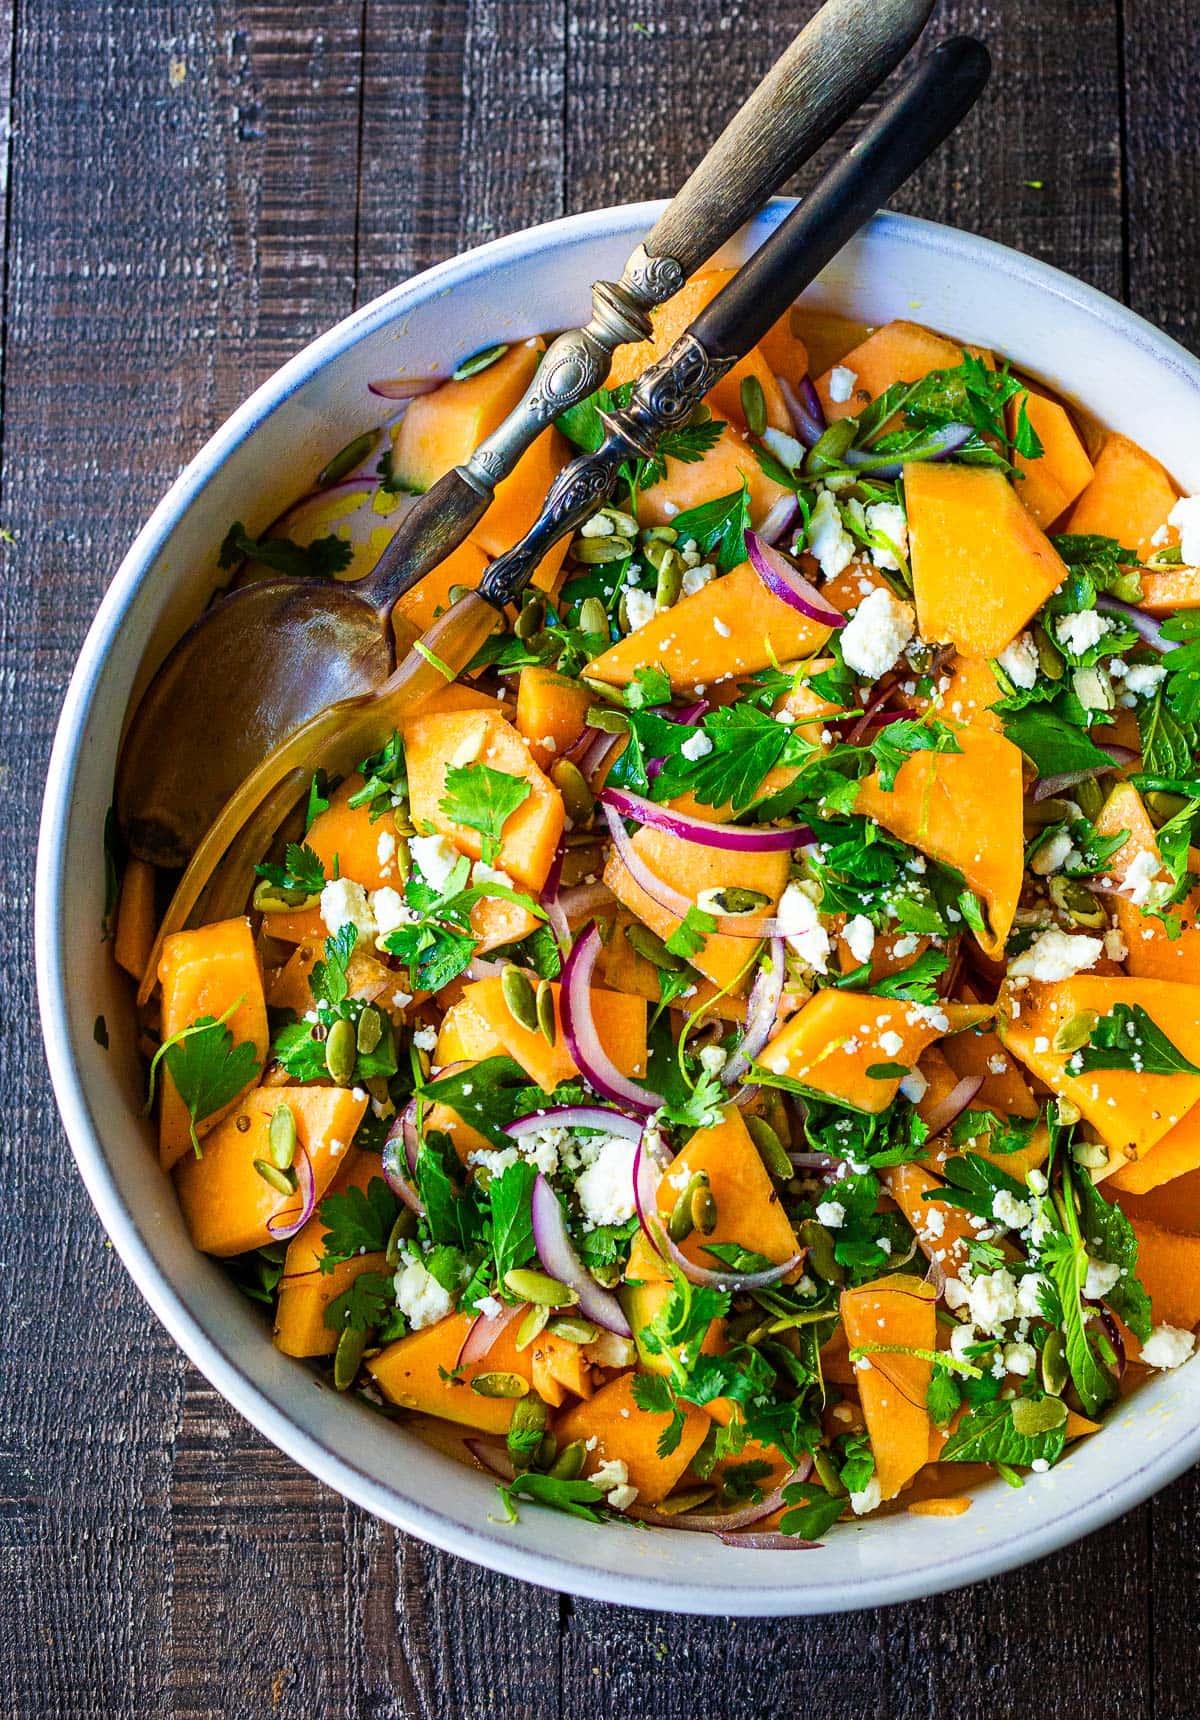 A refreshing Cantaloupe Salad with mint, lime, and pepitas with optional crumbled feta cheese- a tasty, healthy summer salad, perfect for potlucks and gatherings.